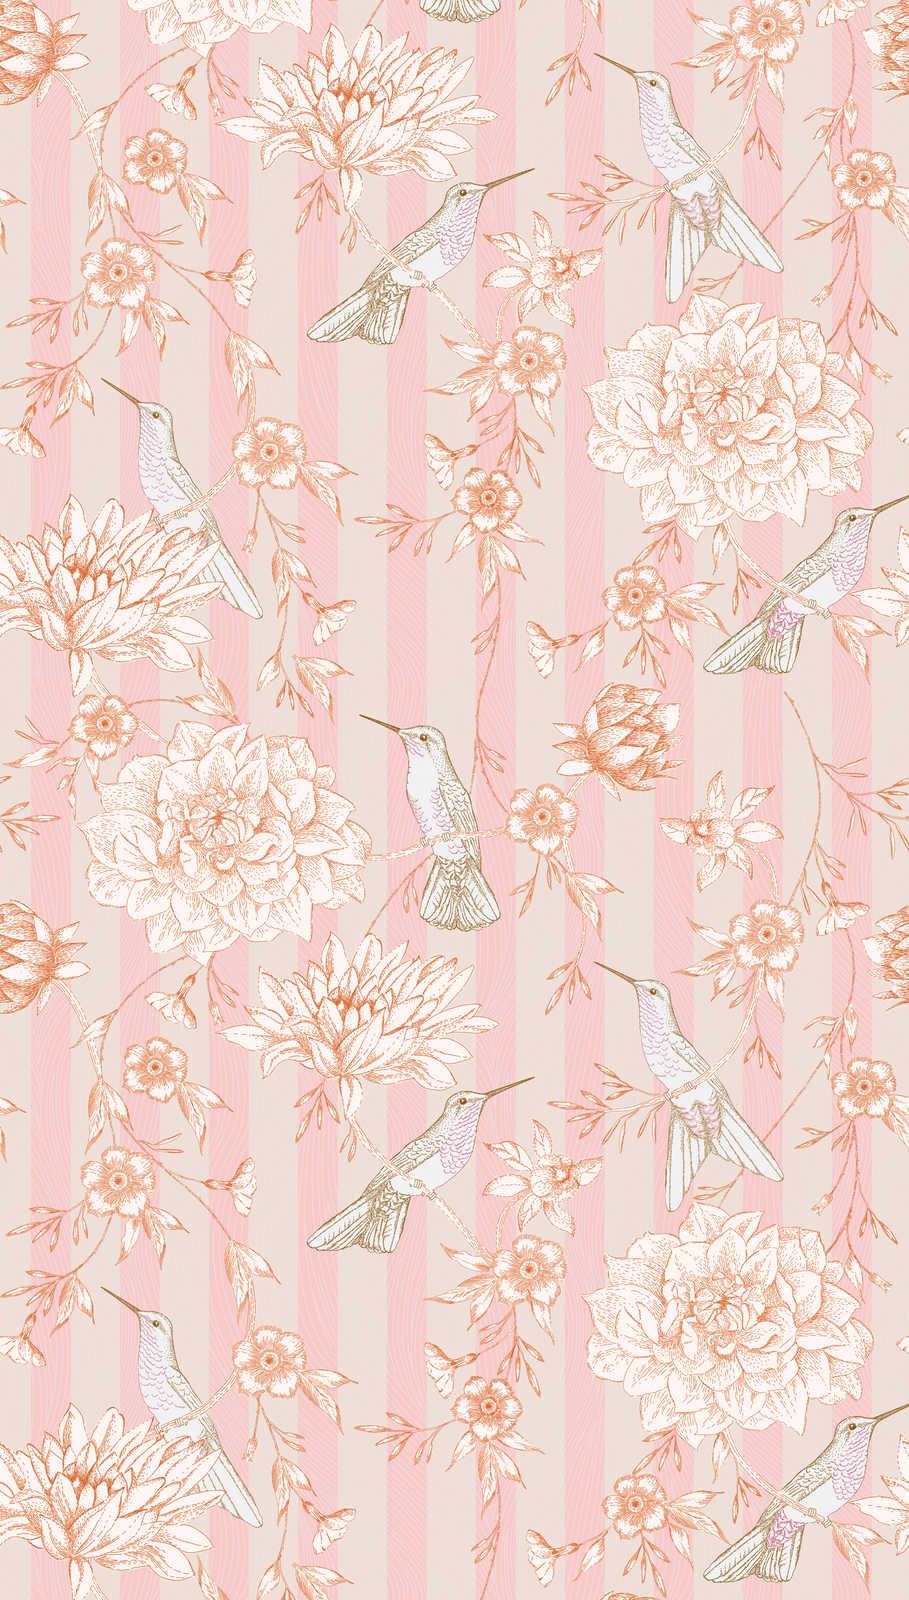             Striped wallpaper with floral motif and birds - pink, beige, orange
        